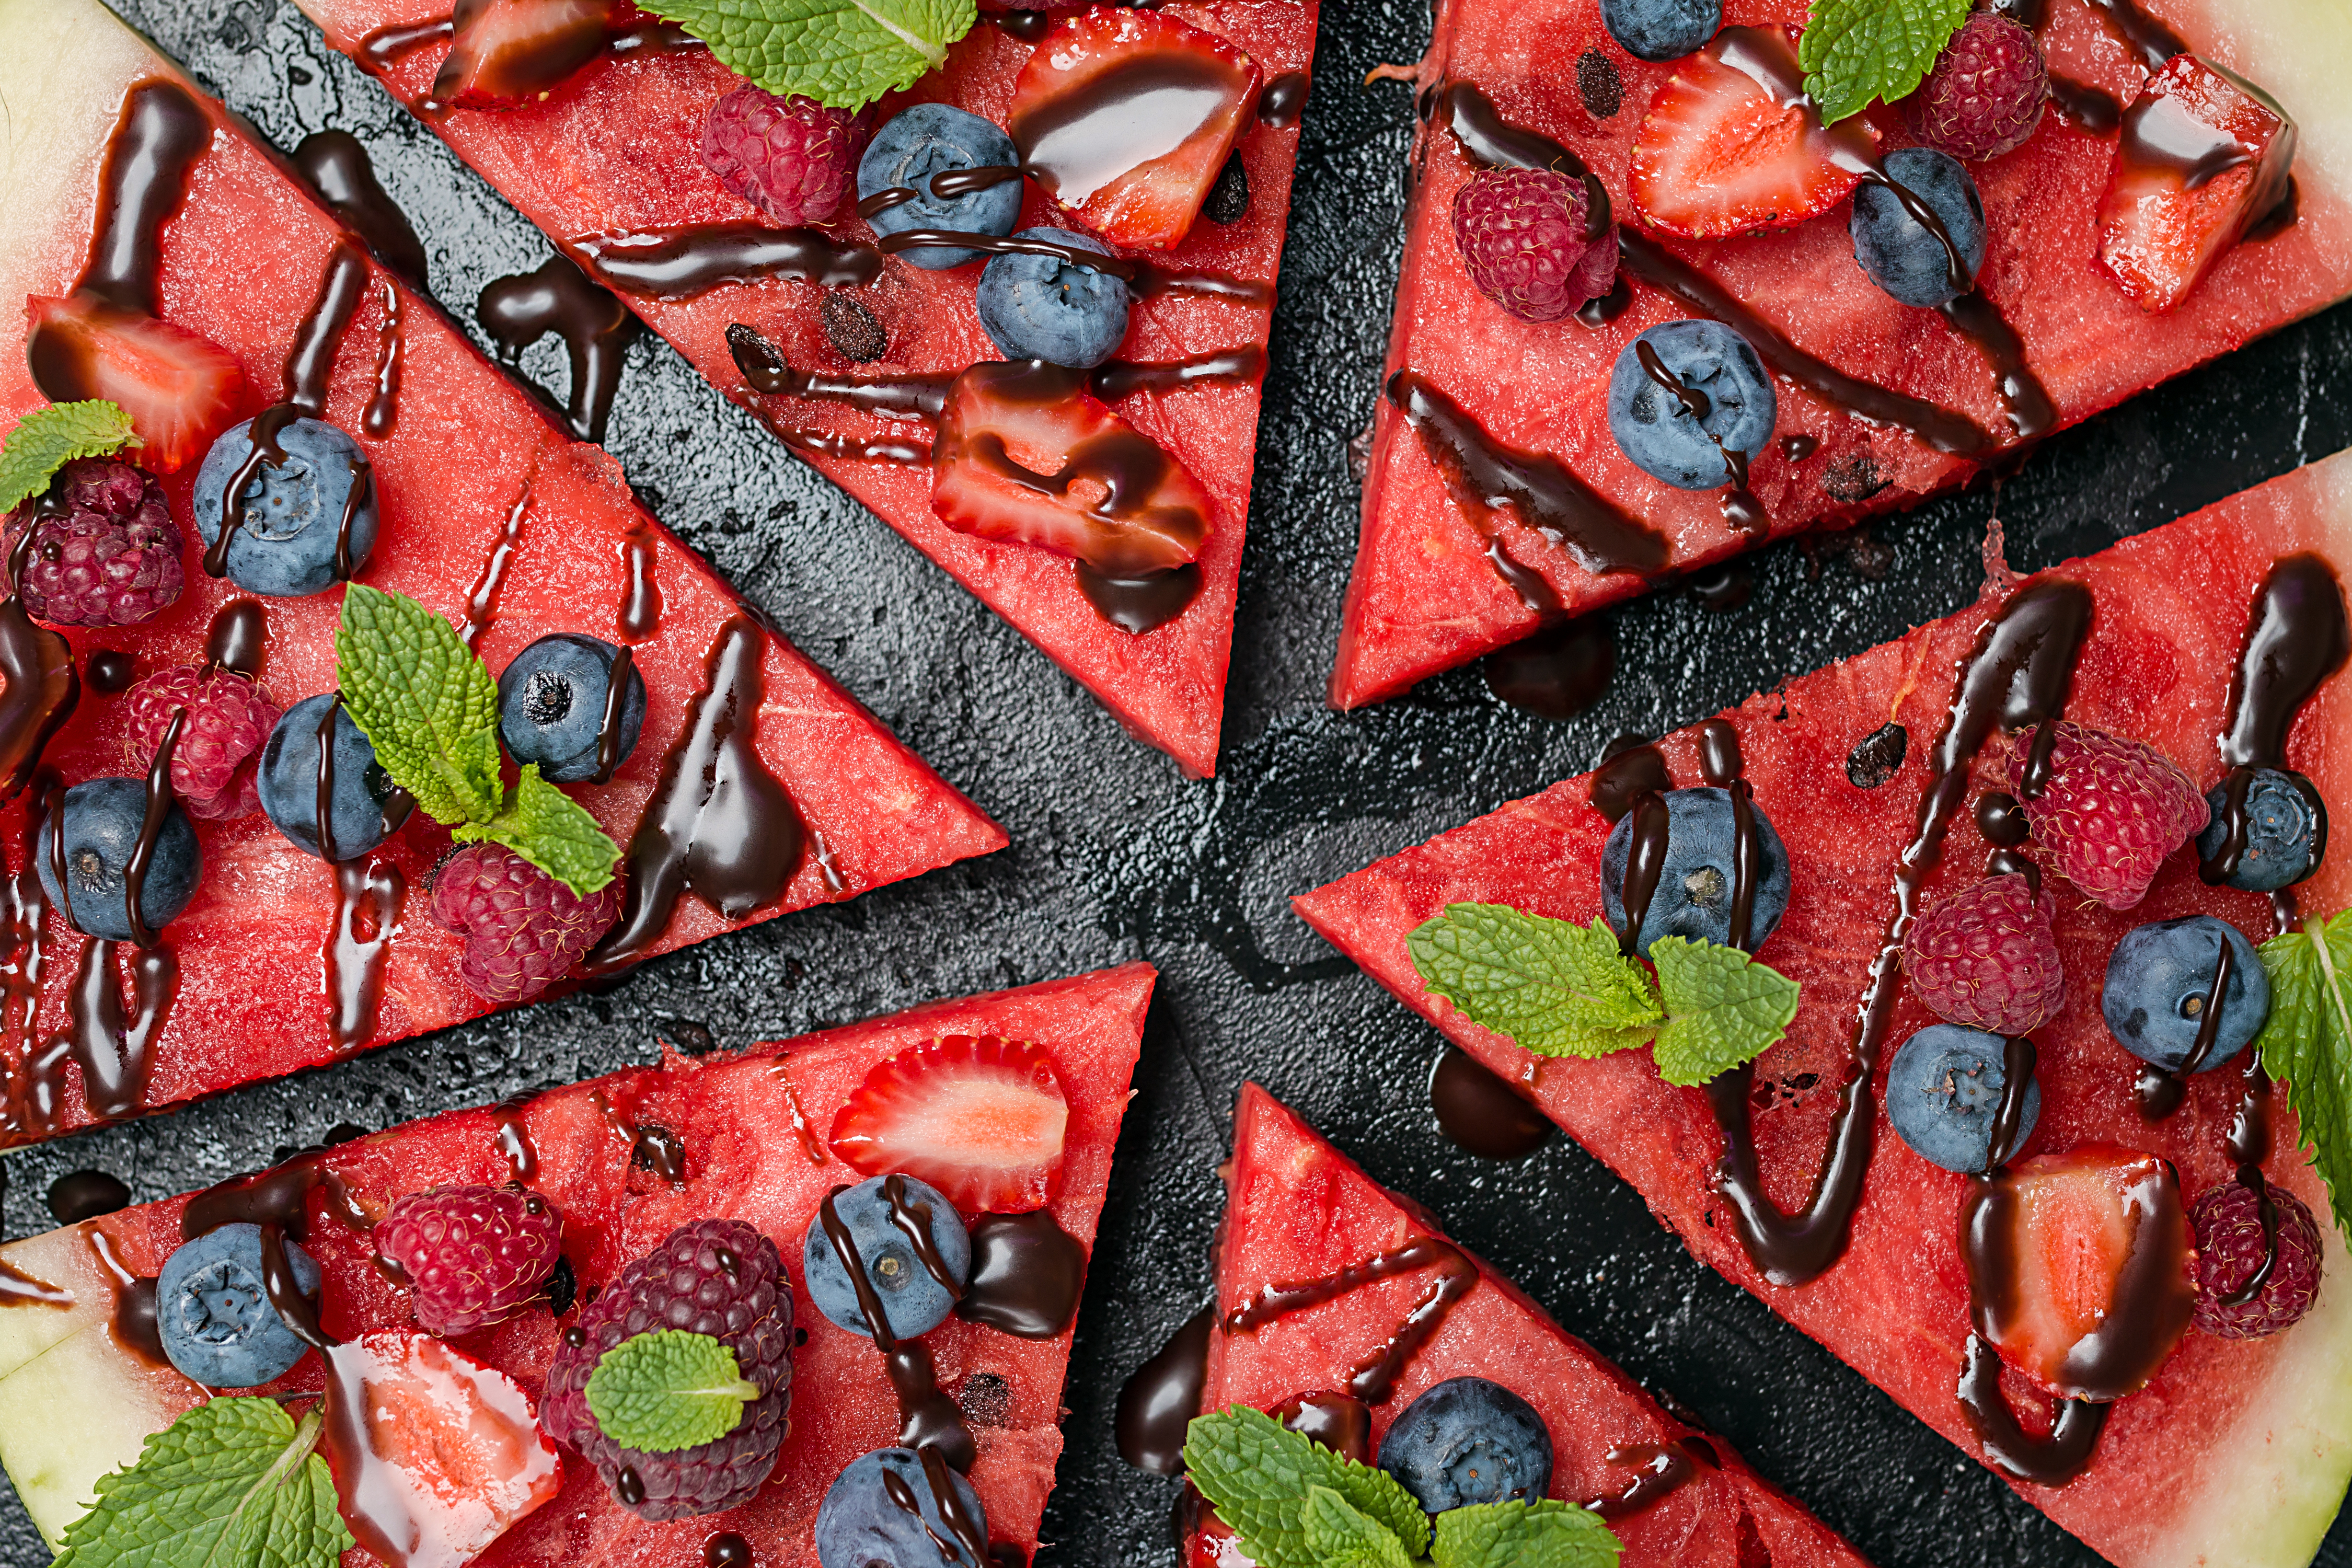 colorful tropical fruit watermelon pizza topped with berries and chocolate sauce cut into segments over black background, top view